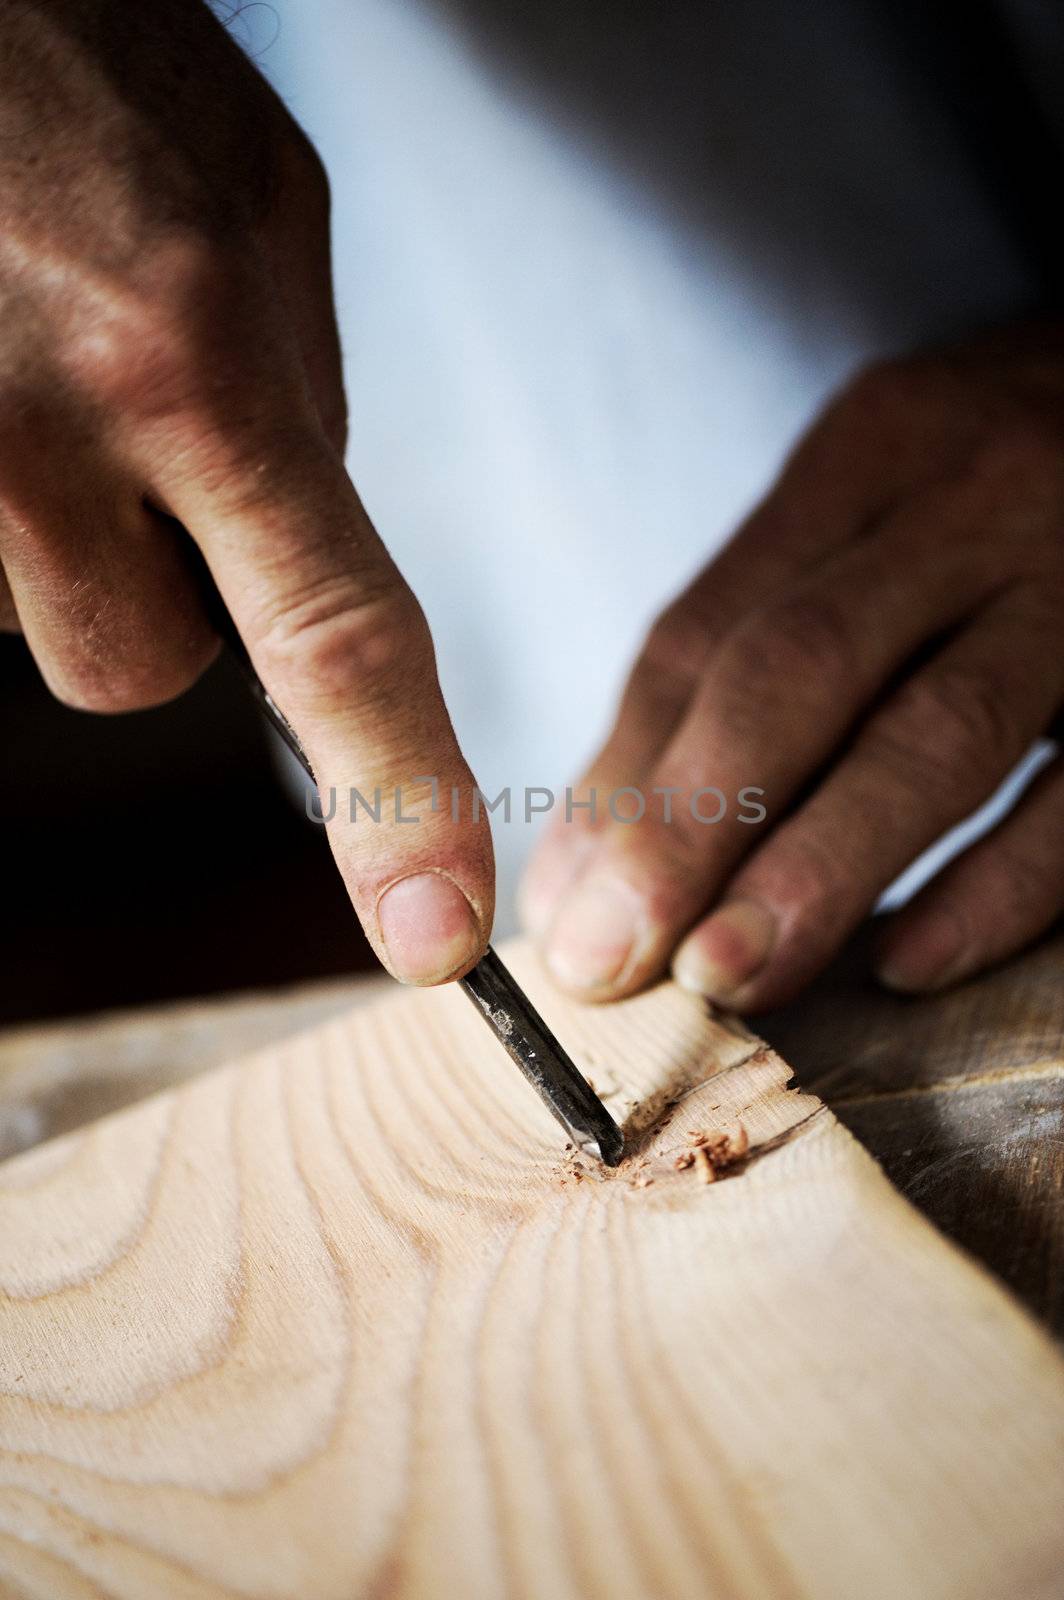 hands of a craftsman by stokkete